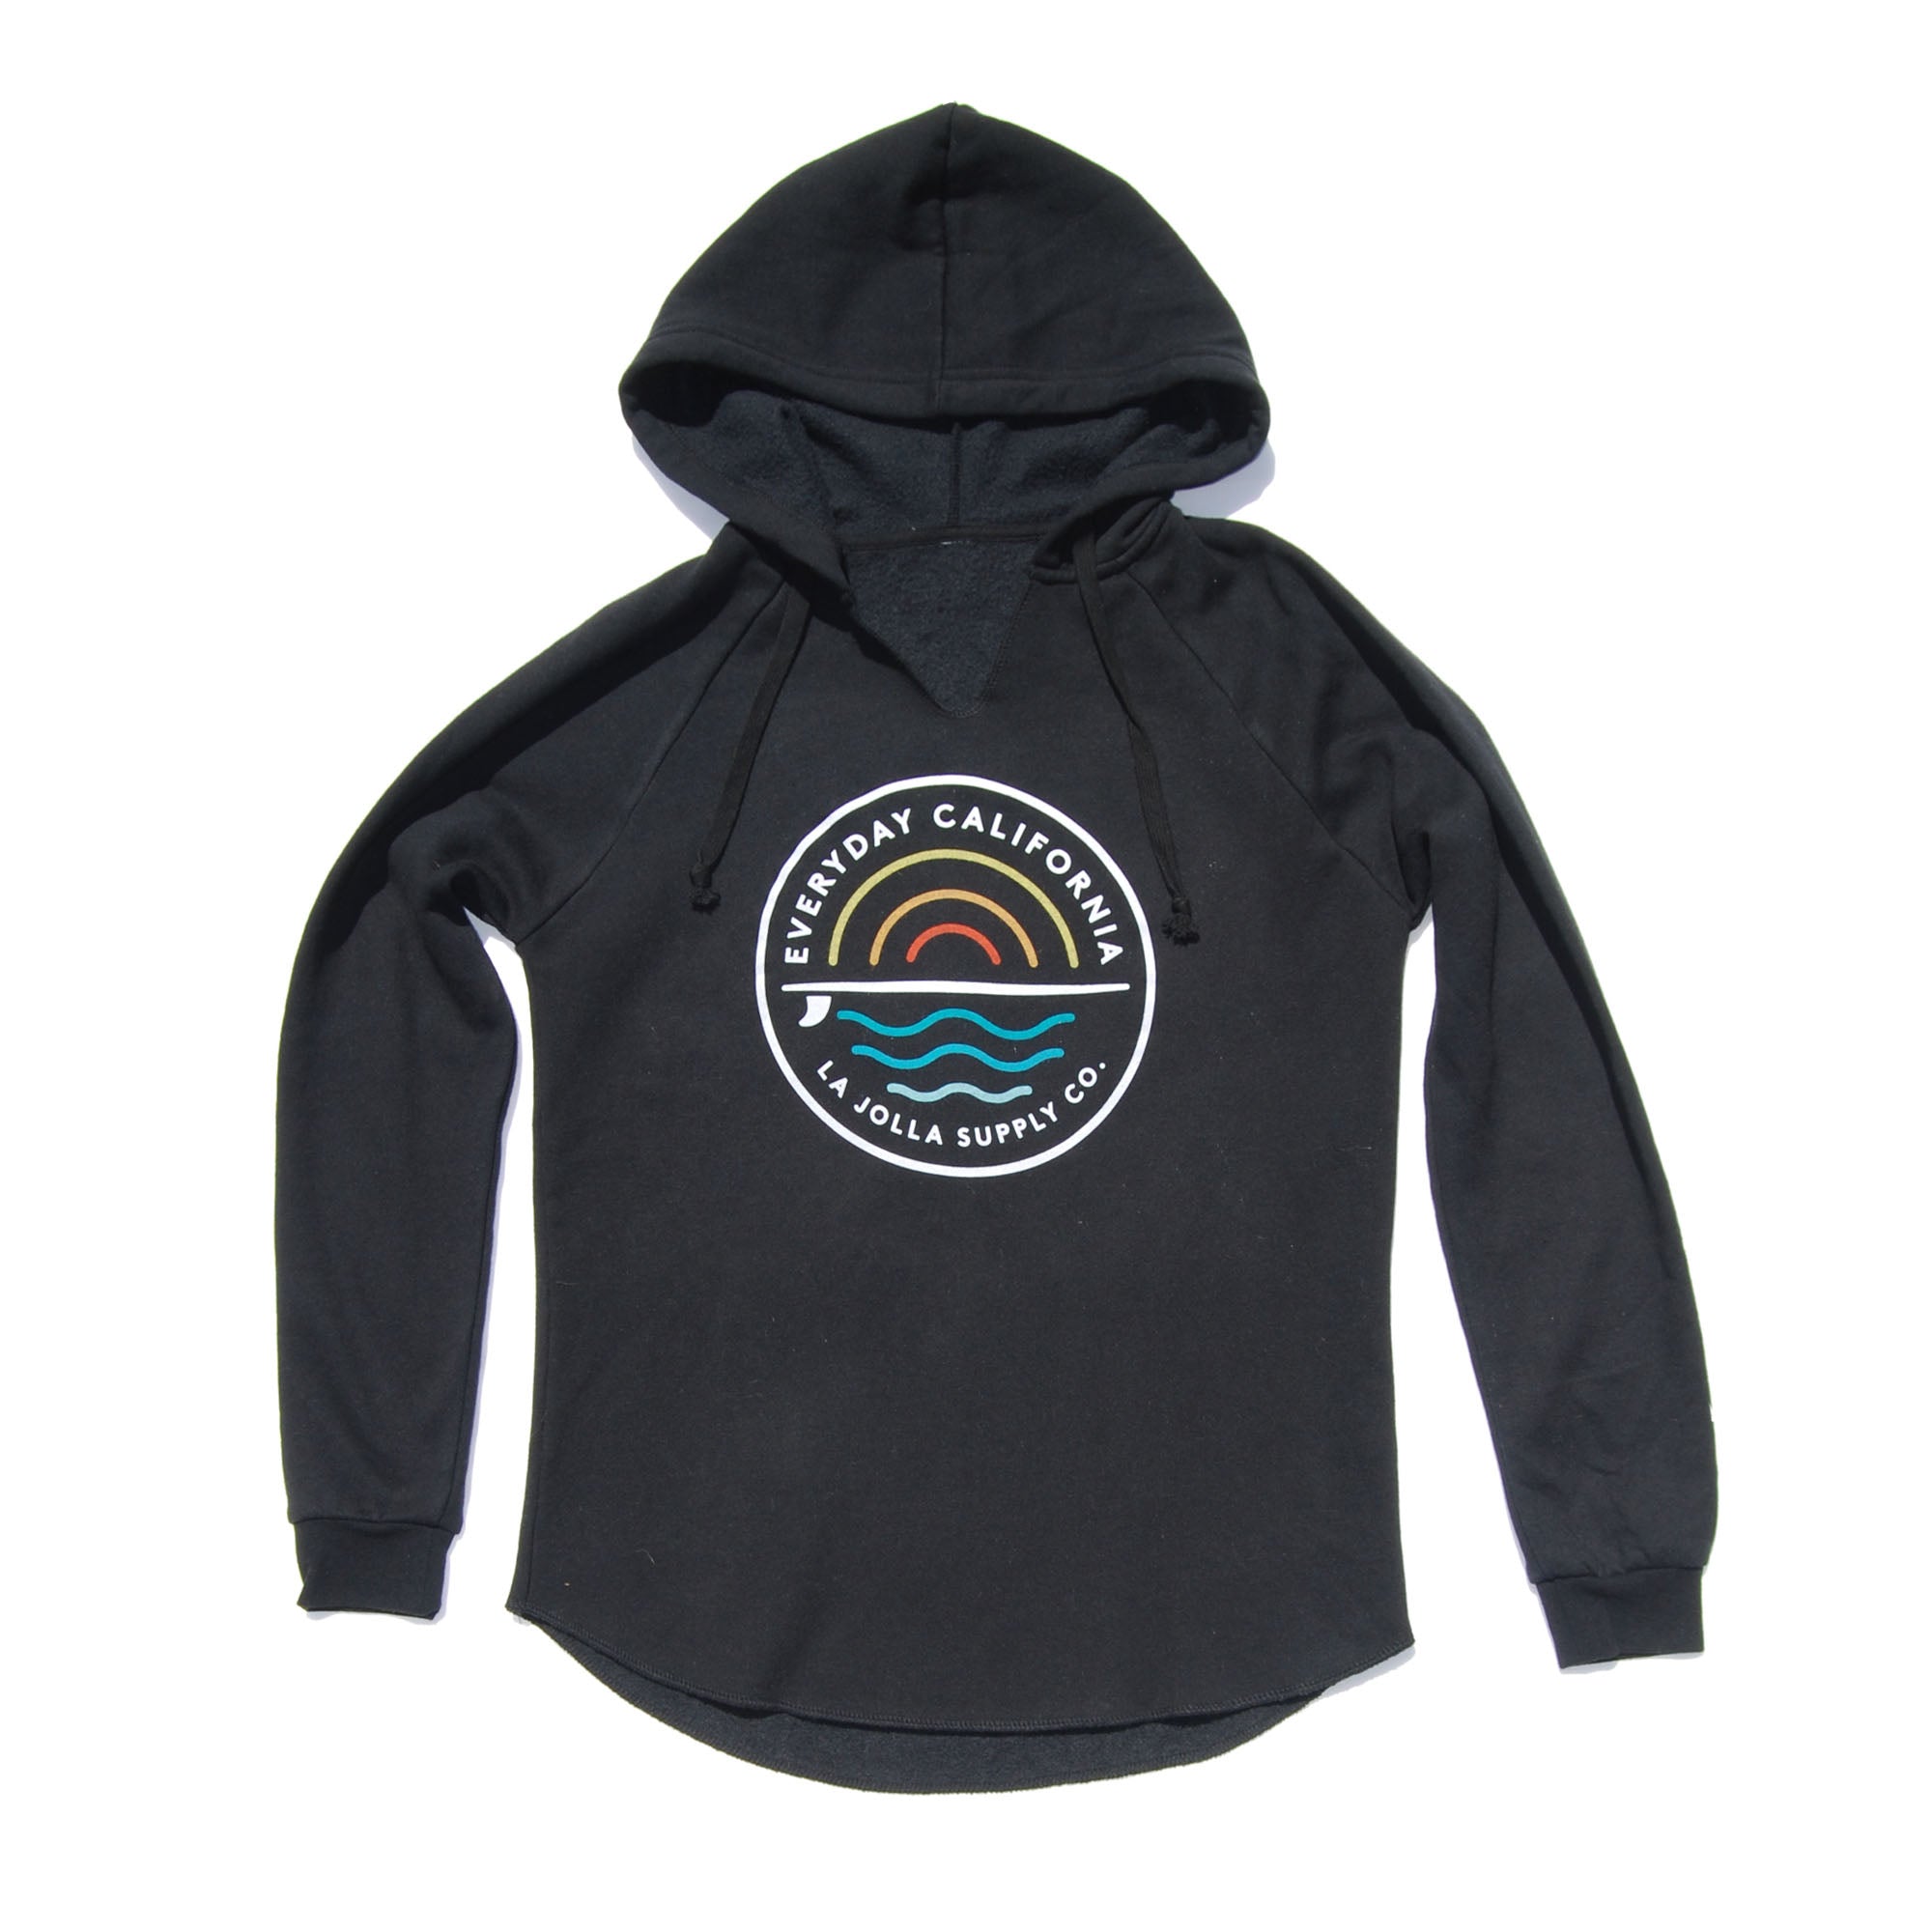 Everyday California Women’s Cabrillo Hoodie - Black women’s hoodie with sun and sea logo with text Everyday California and La Jolla Supply Co.